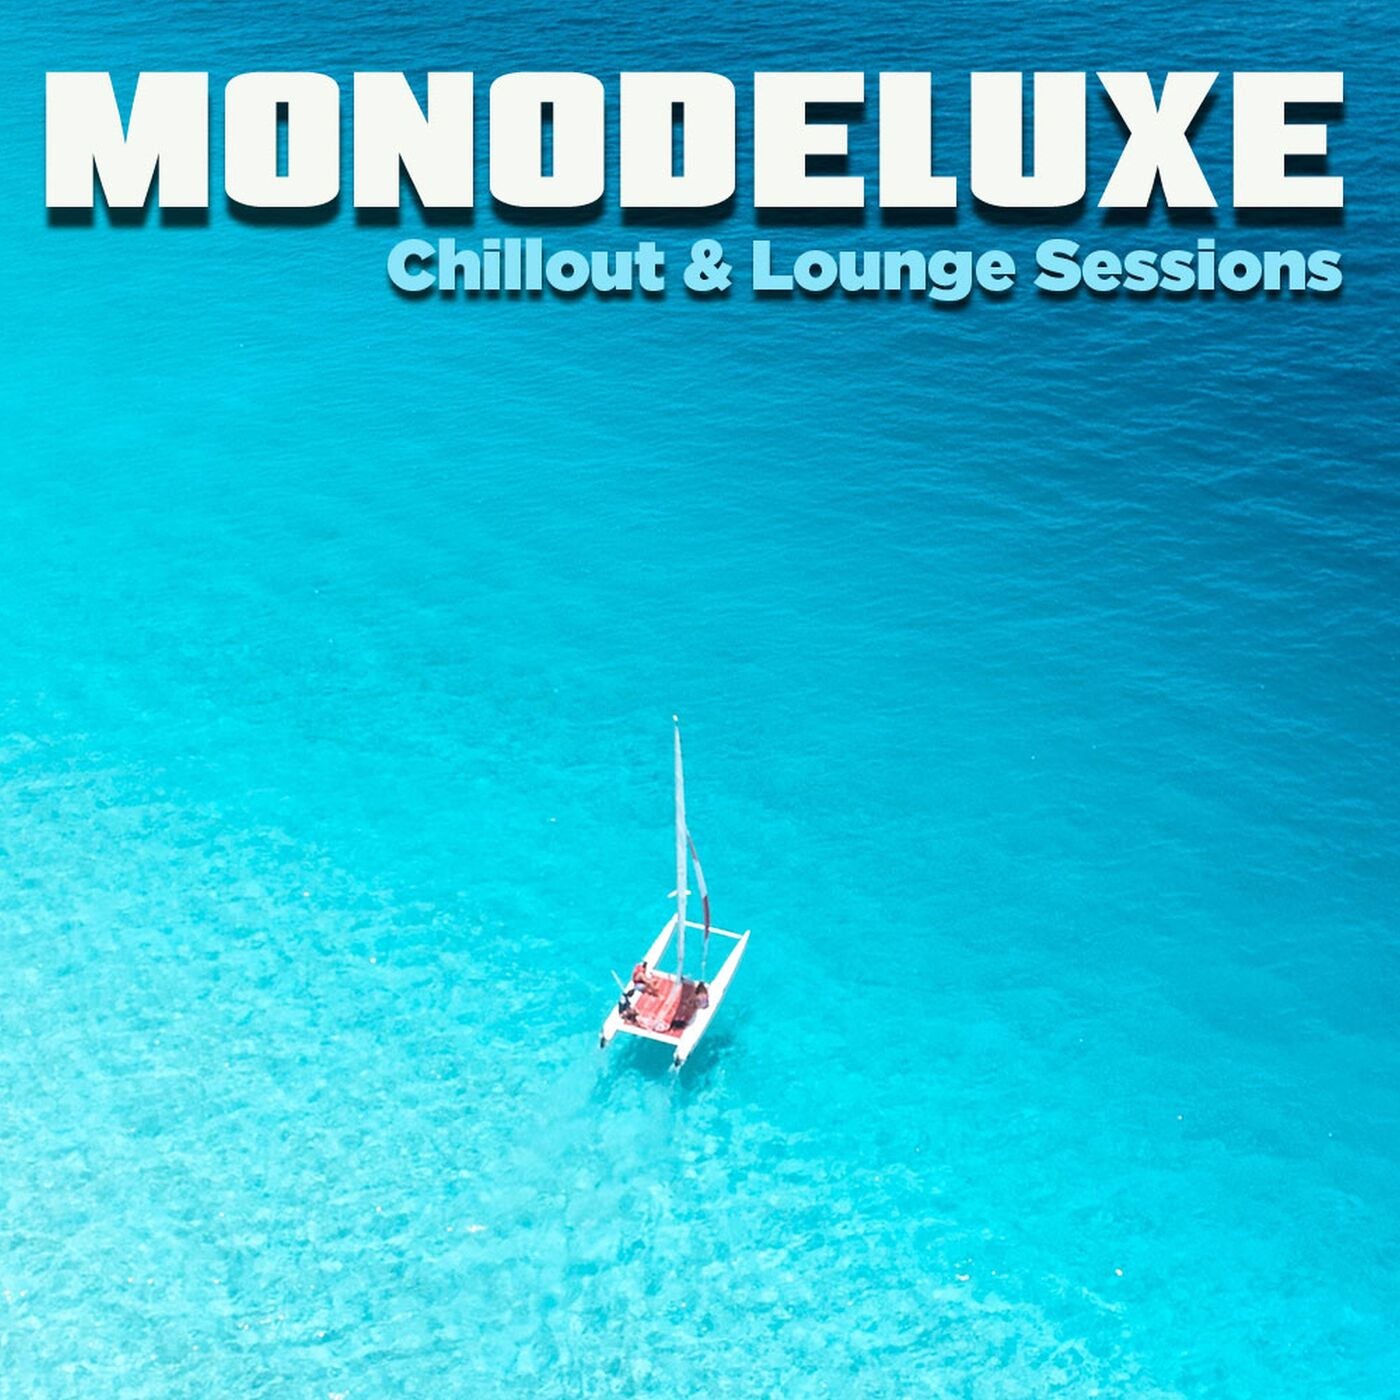 Chillout & Lounge Sessions